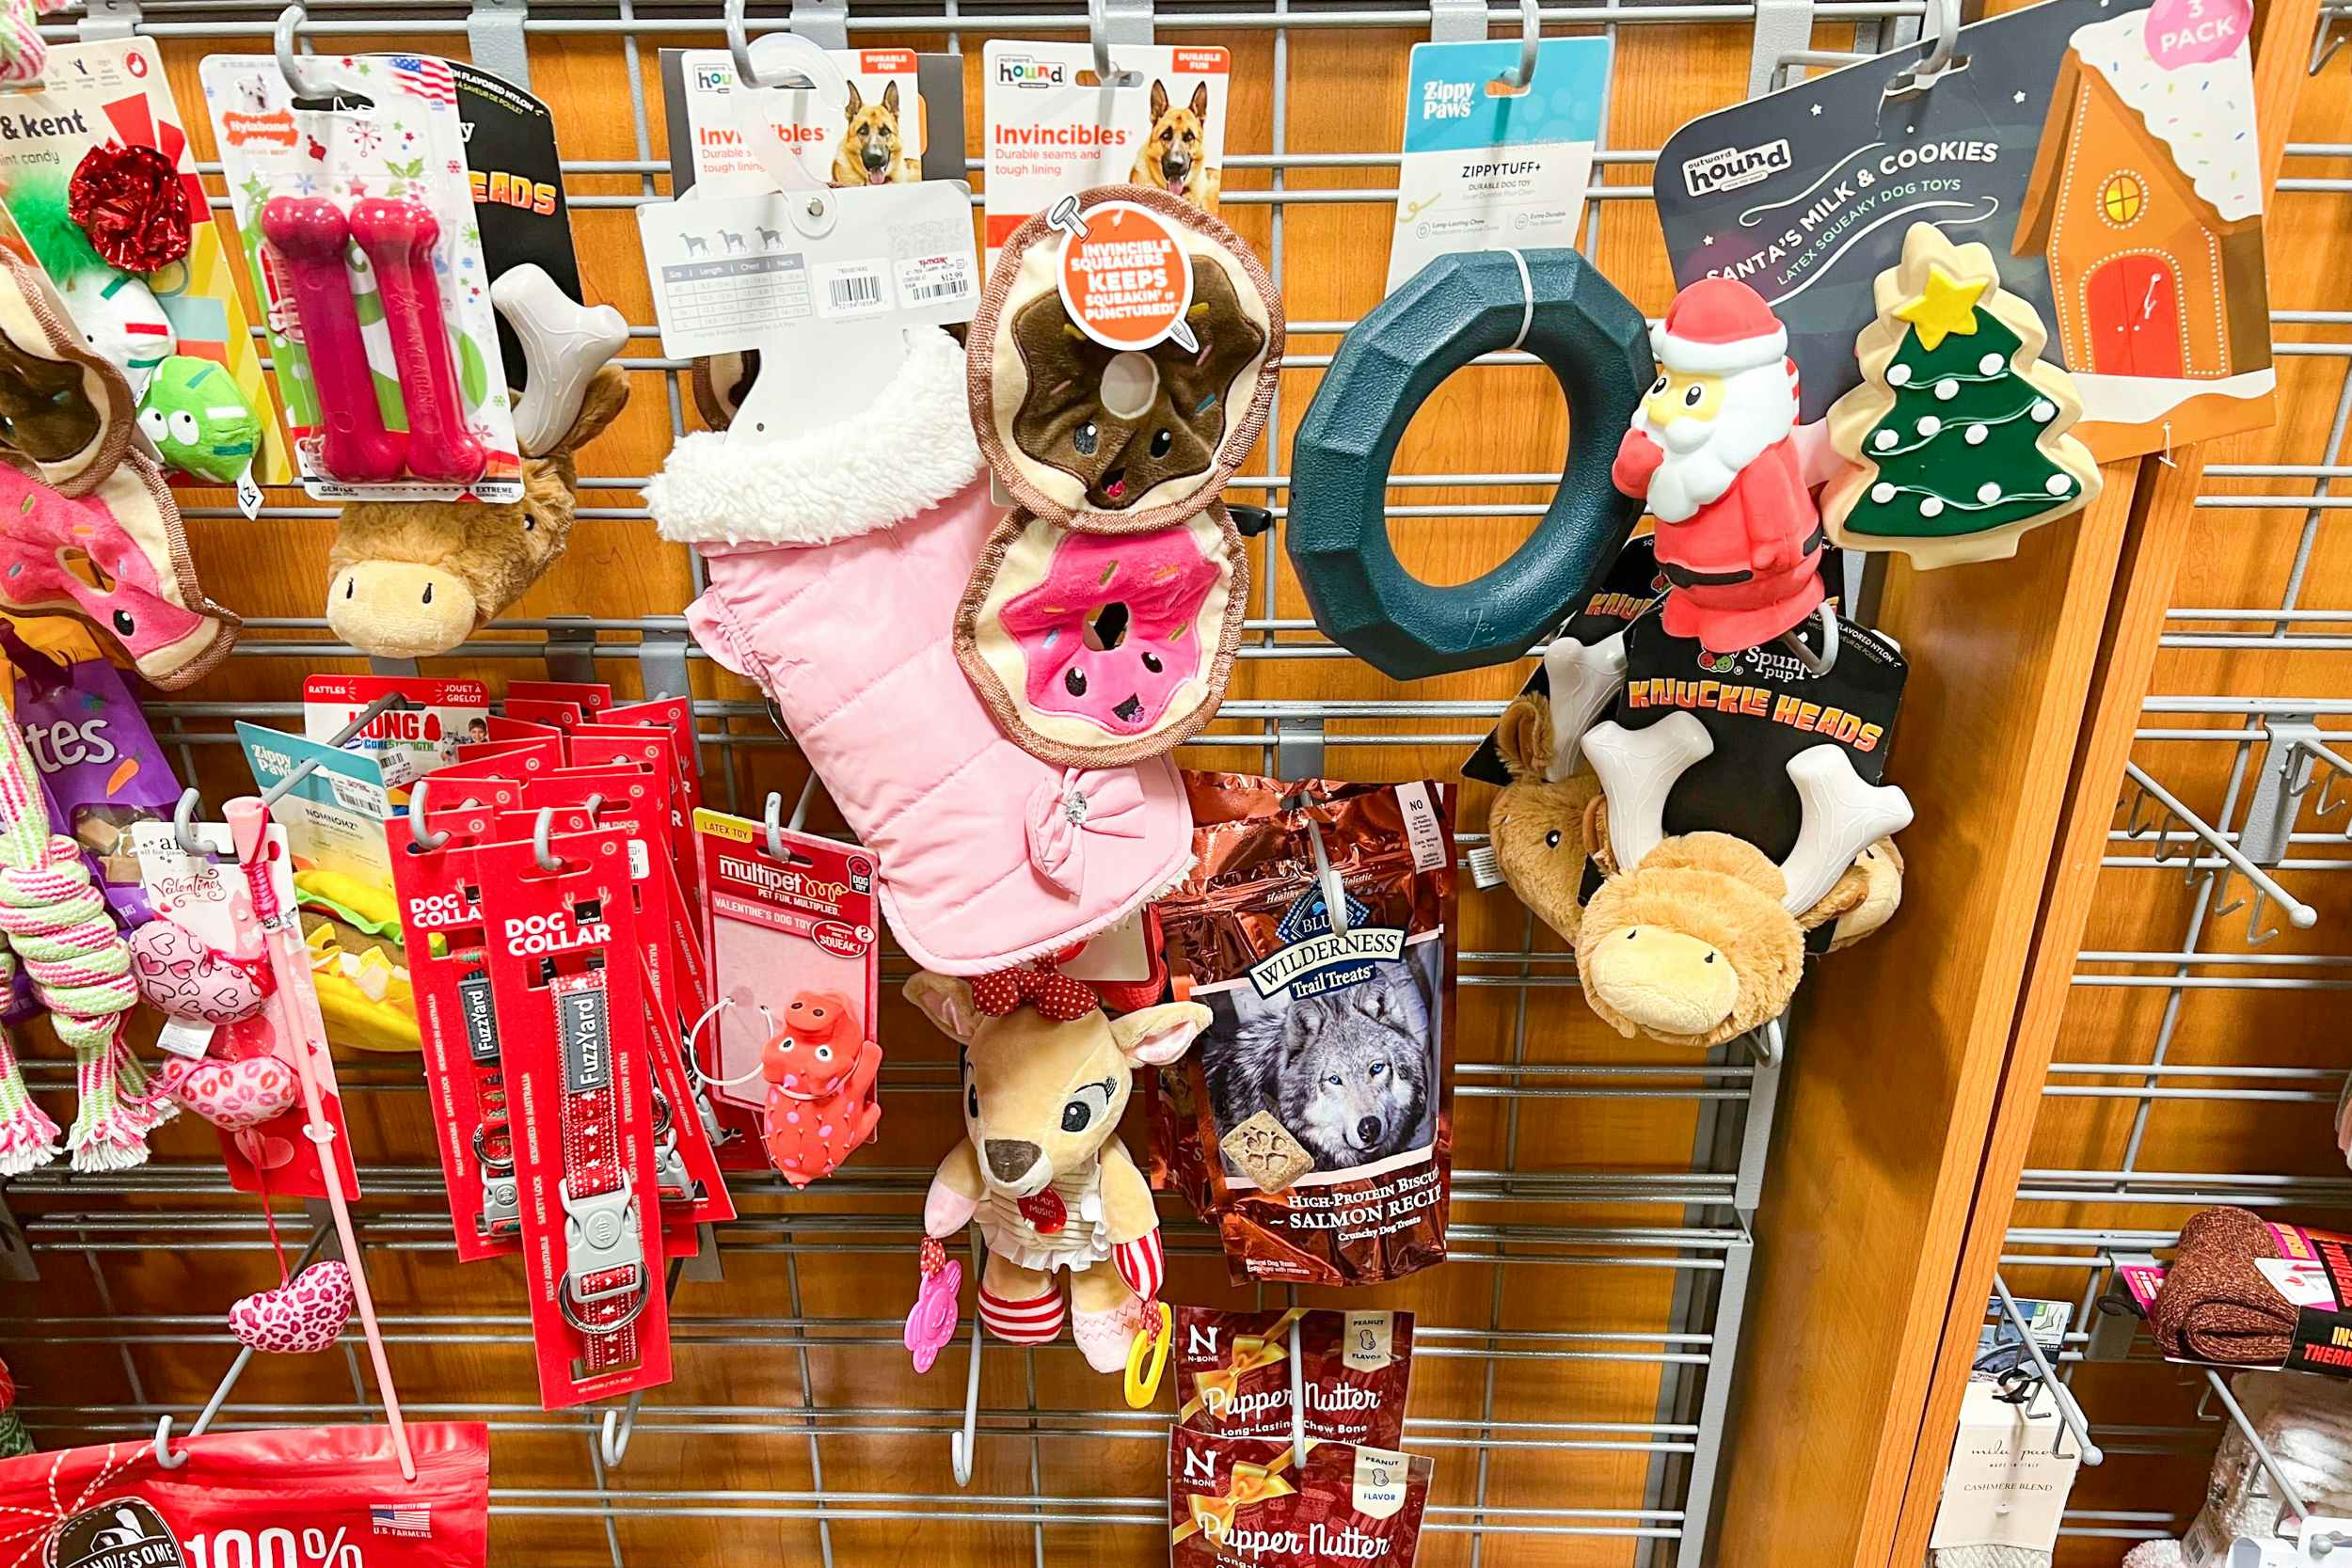 pet toys at TJMaxx, some of the packages missing items